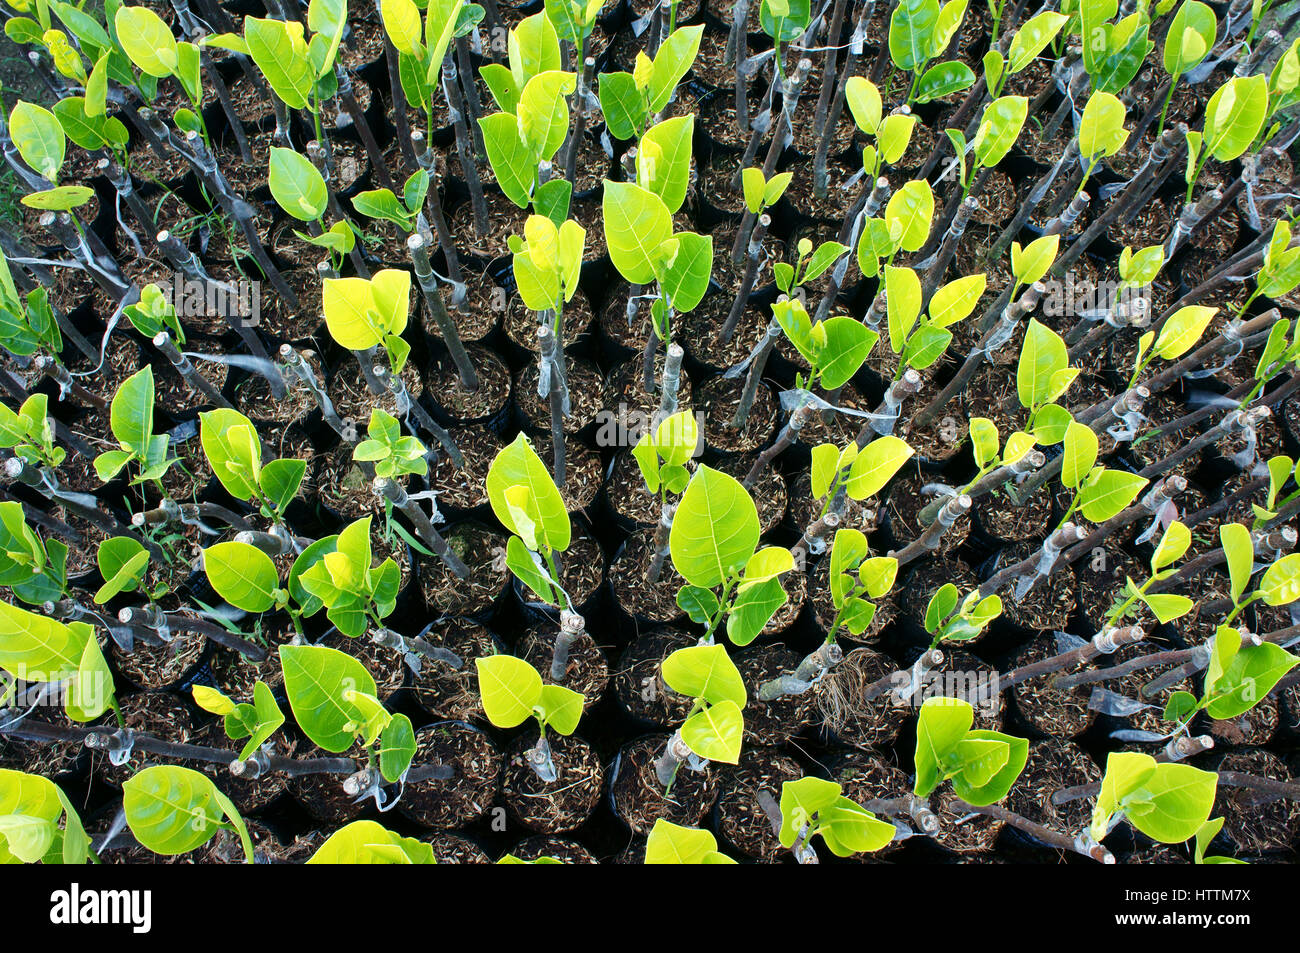 Group of nursery plant at nursery garden of Ben Tre, Mekong Delta, Viet Nam, this is large fruit tree area, green seedling grow in good condition Stock Photo